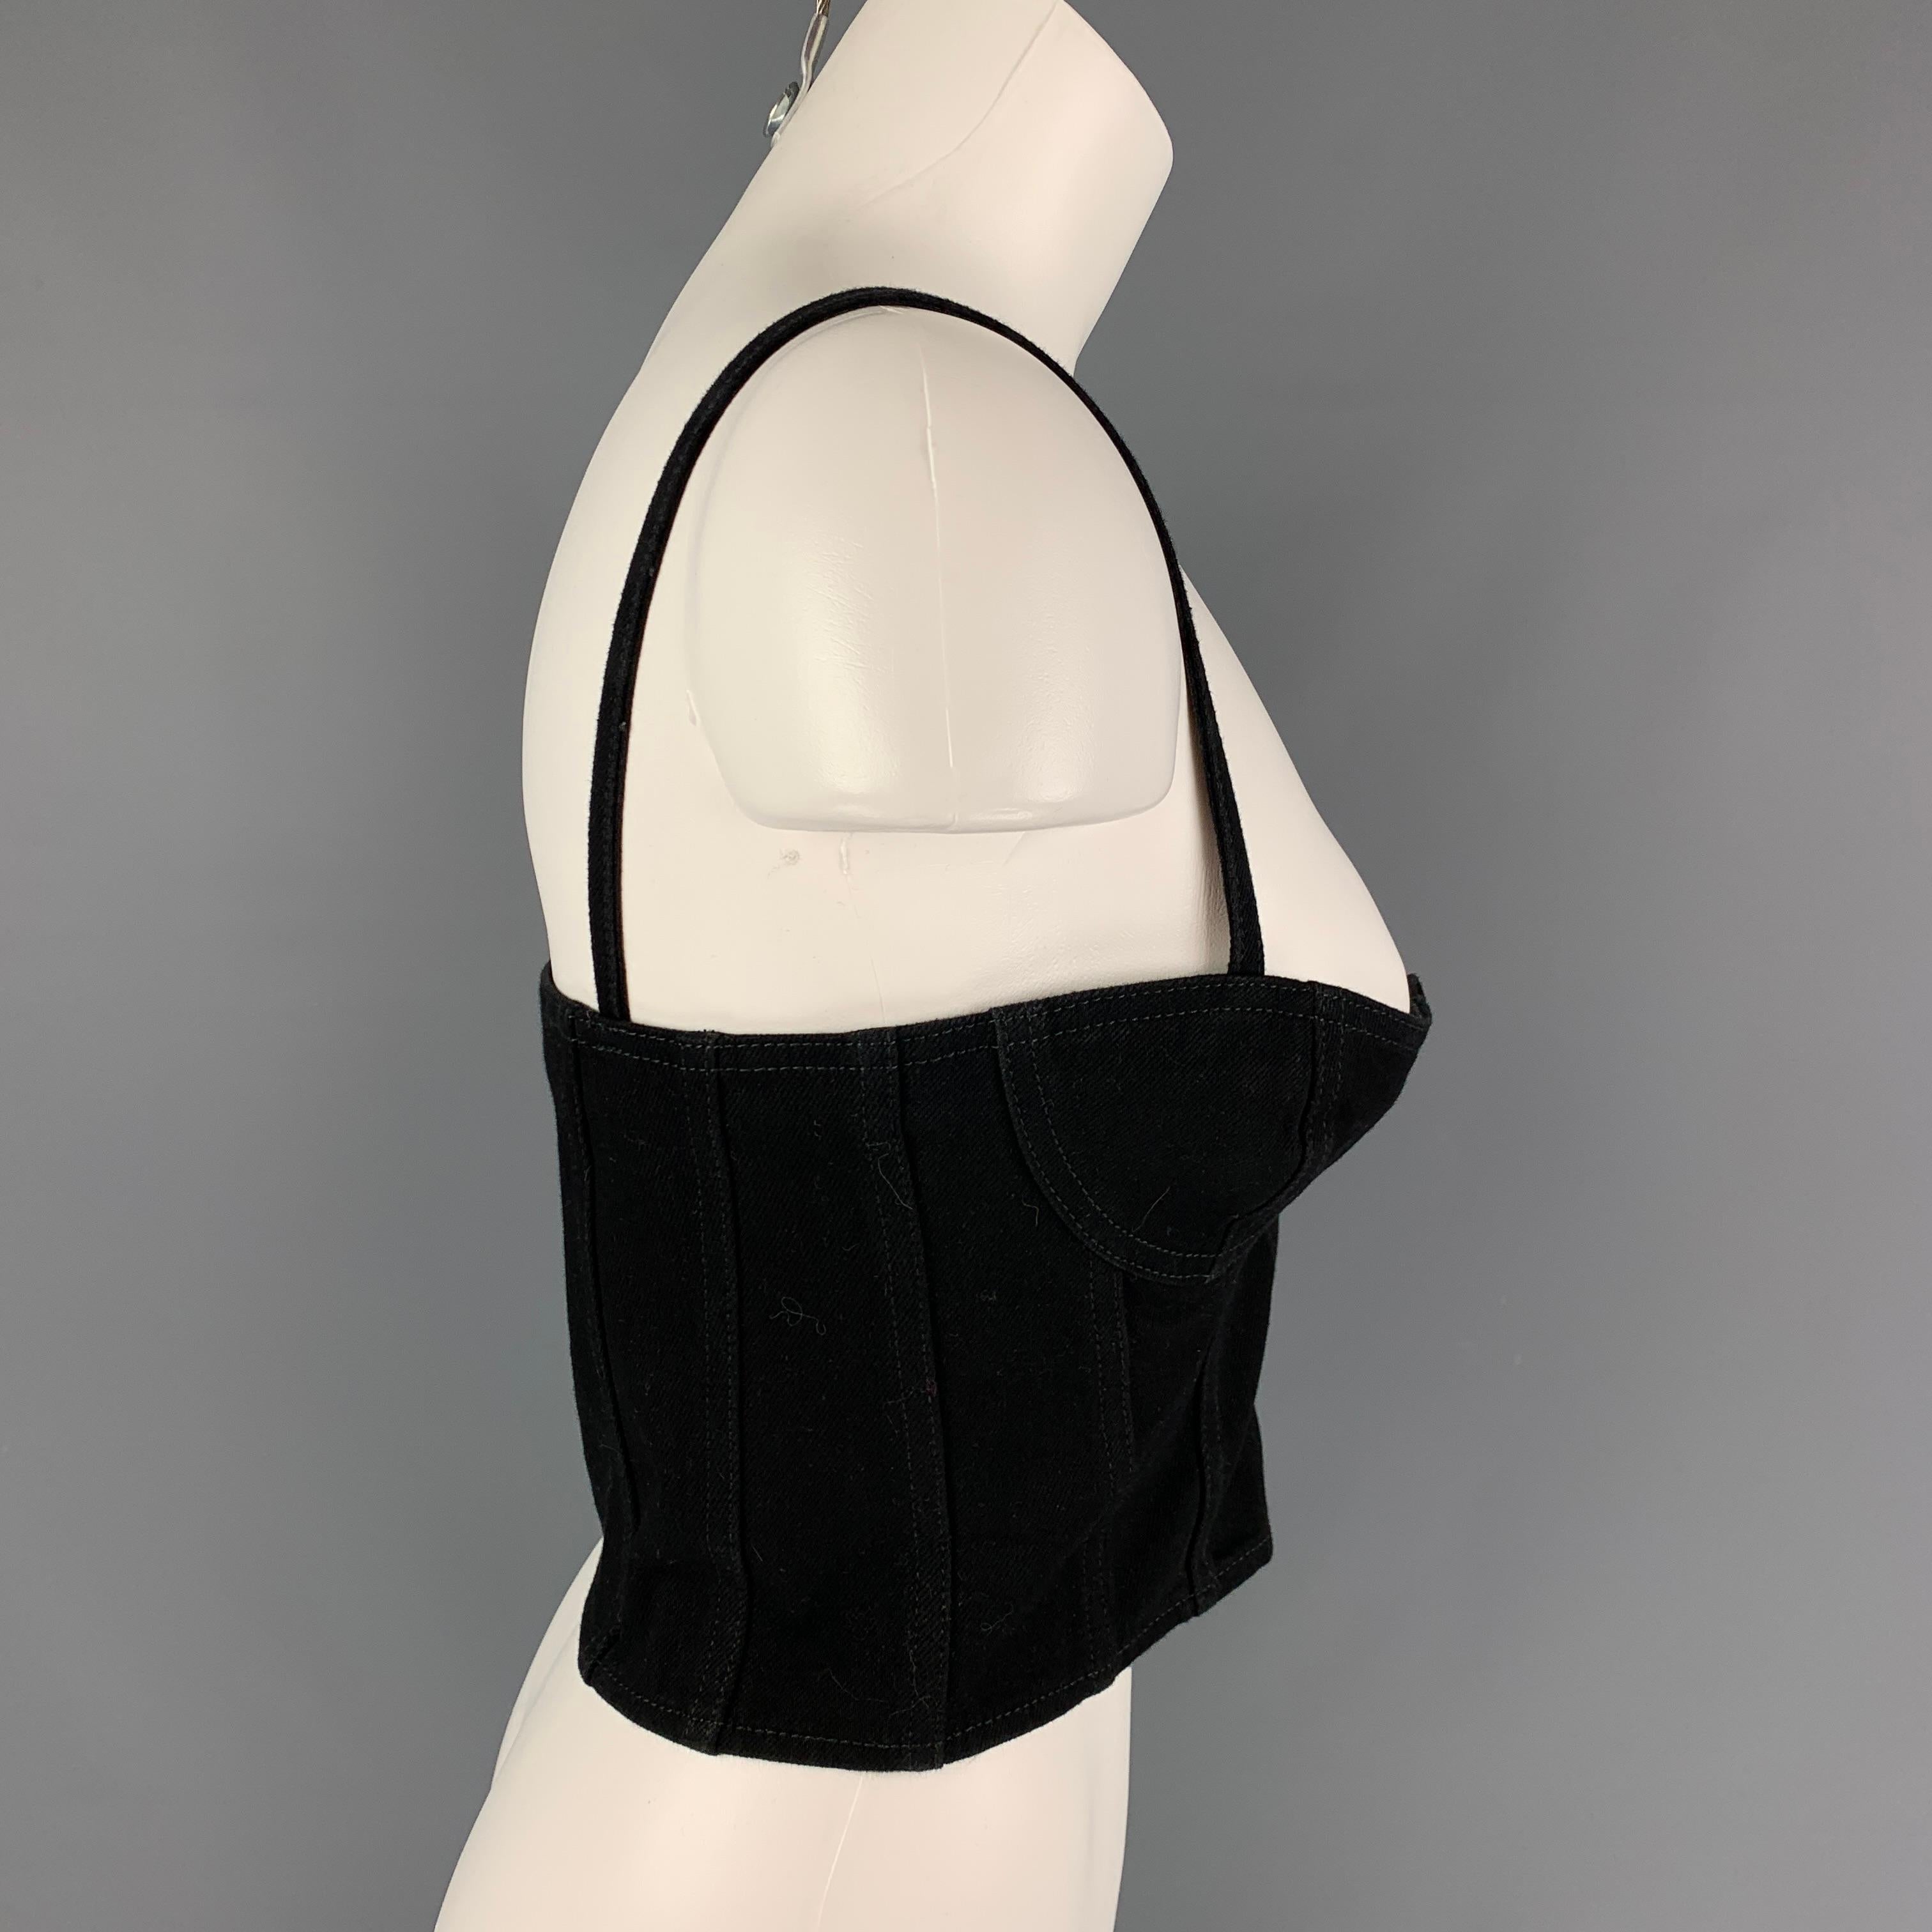 SAINT LAURENT top comes in a black denim featuring fixed spaghetti straps, top stitching, and a front buttoned closure. Made in Italy. 

Excellent Pre-Owned Condition.
Marked: F36
Original Retail Price: $790.00

Measurements:

Bust: 30 in.
Length: 8